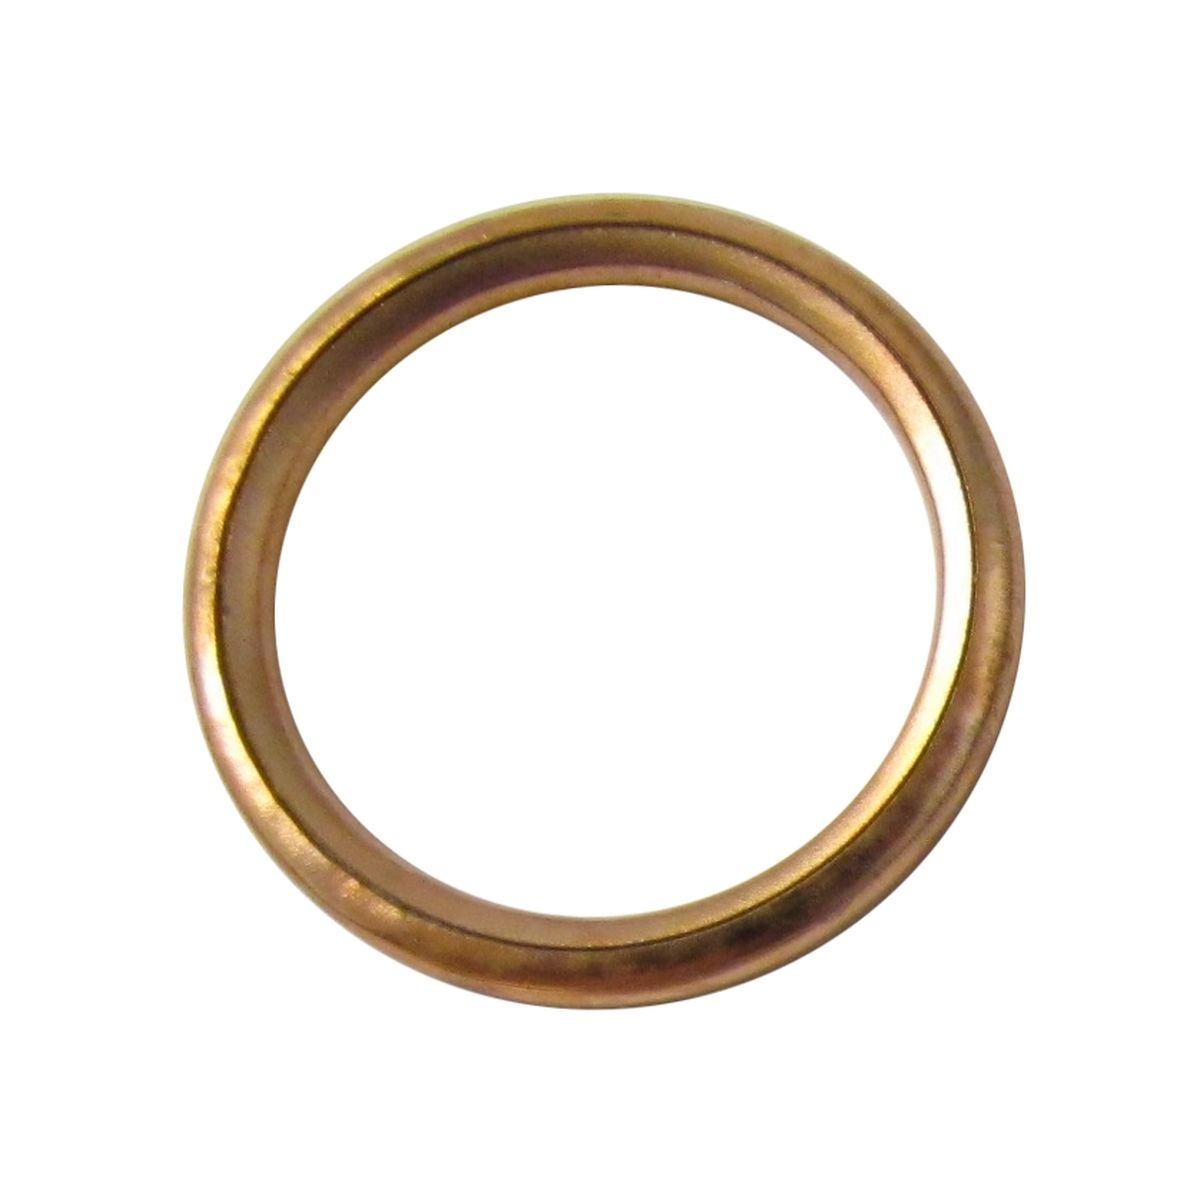 Exhaust Gasket Copper Purchase Ranking TOP16 1 for 2004 4 Honda FES 150 Pantheon